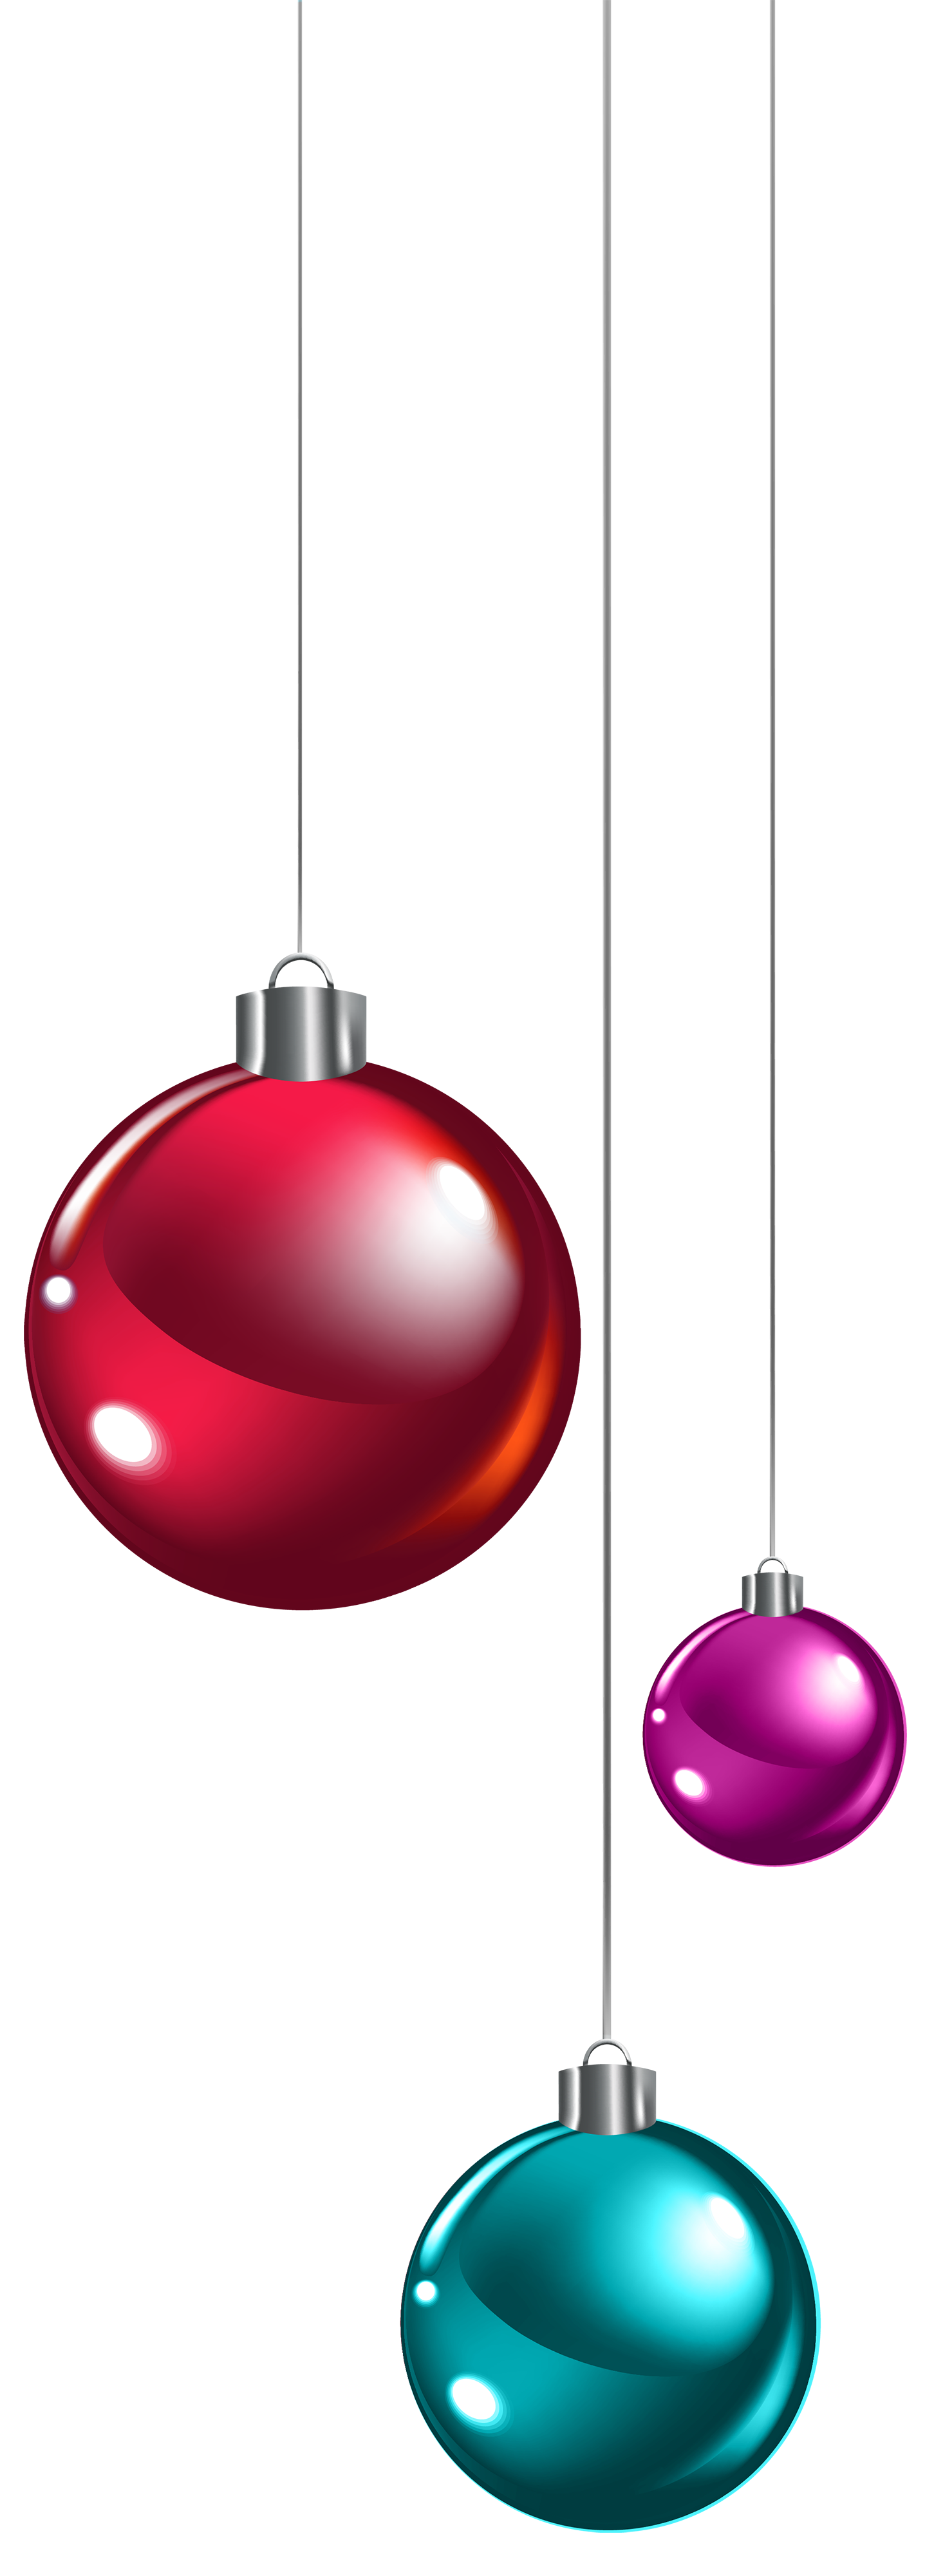 Ornaments Christmas Colorful Free Photo PNG Image